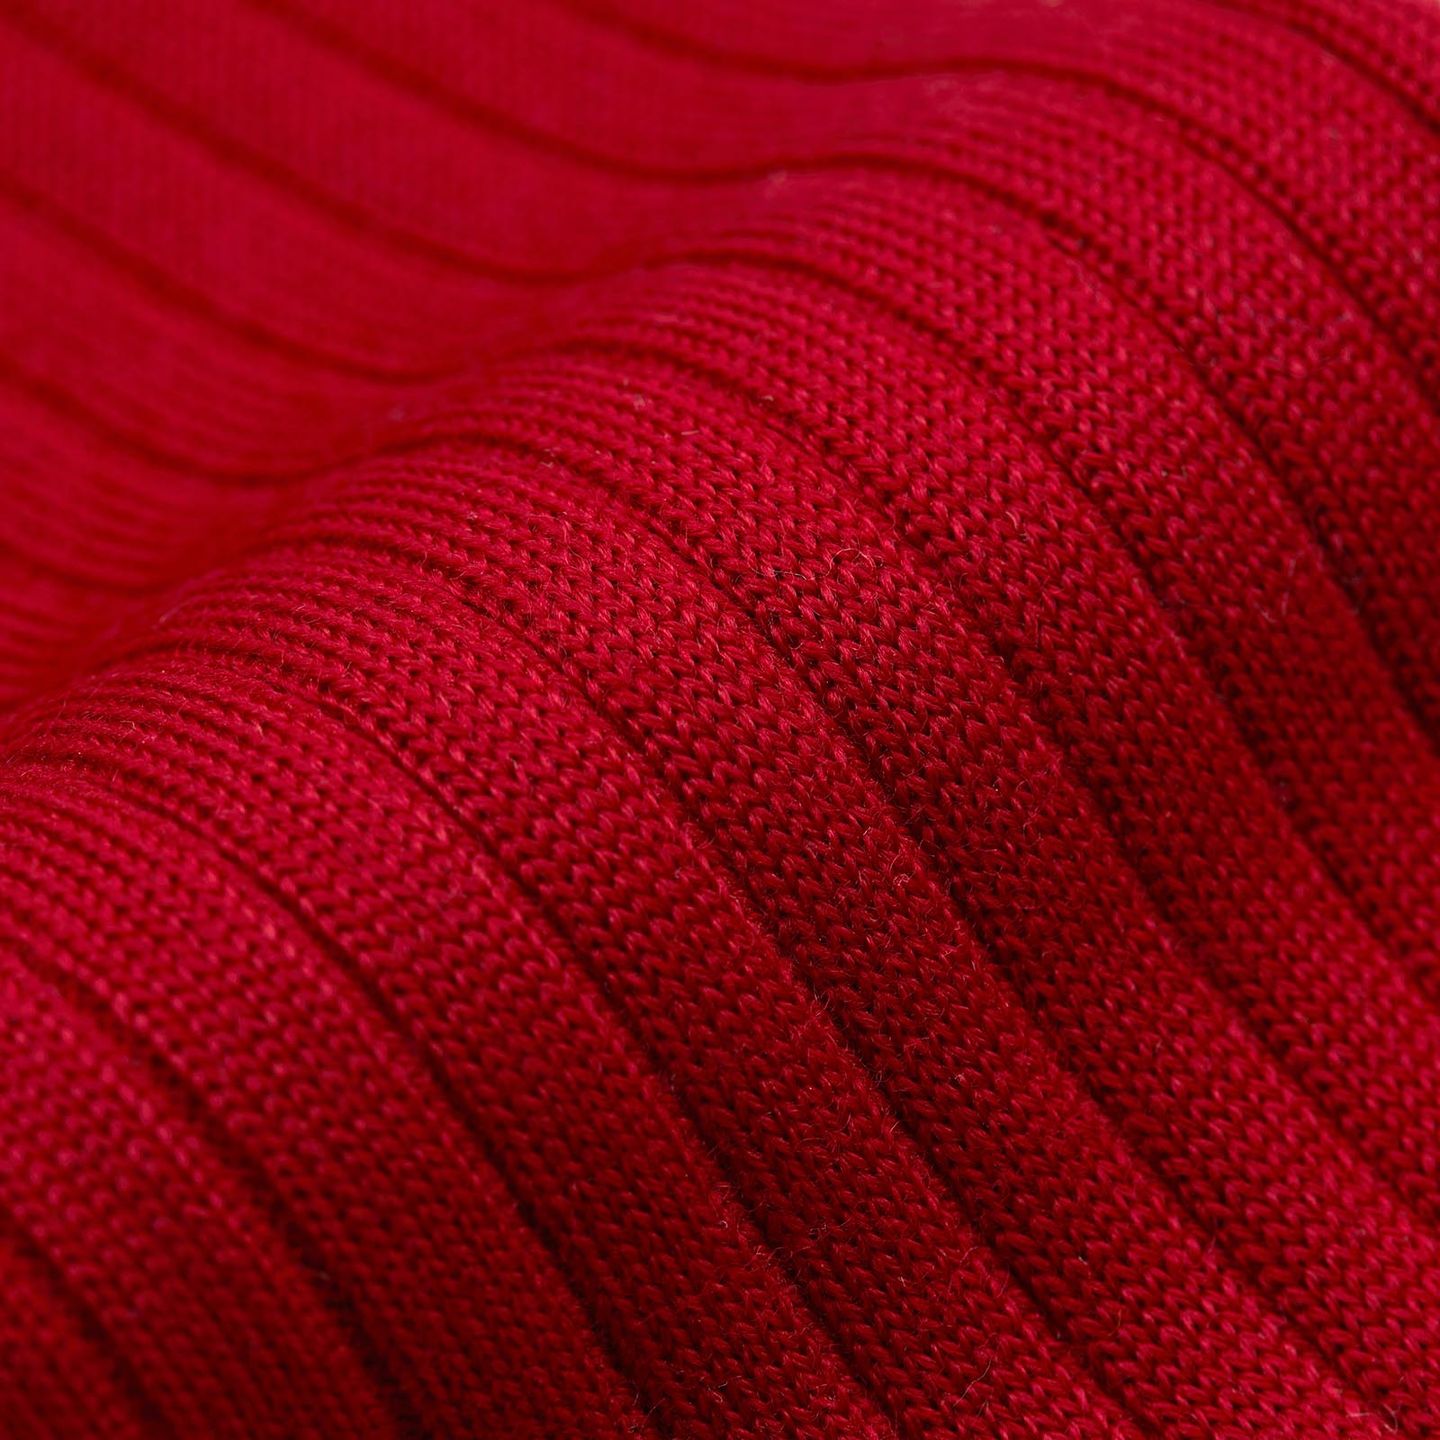 A close up of a pair of red socks